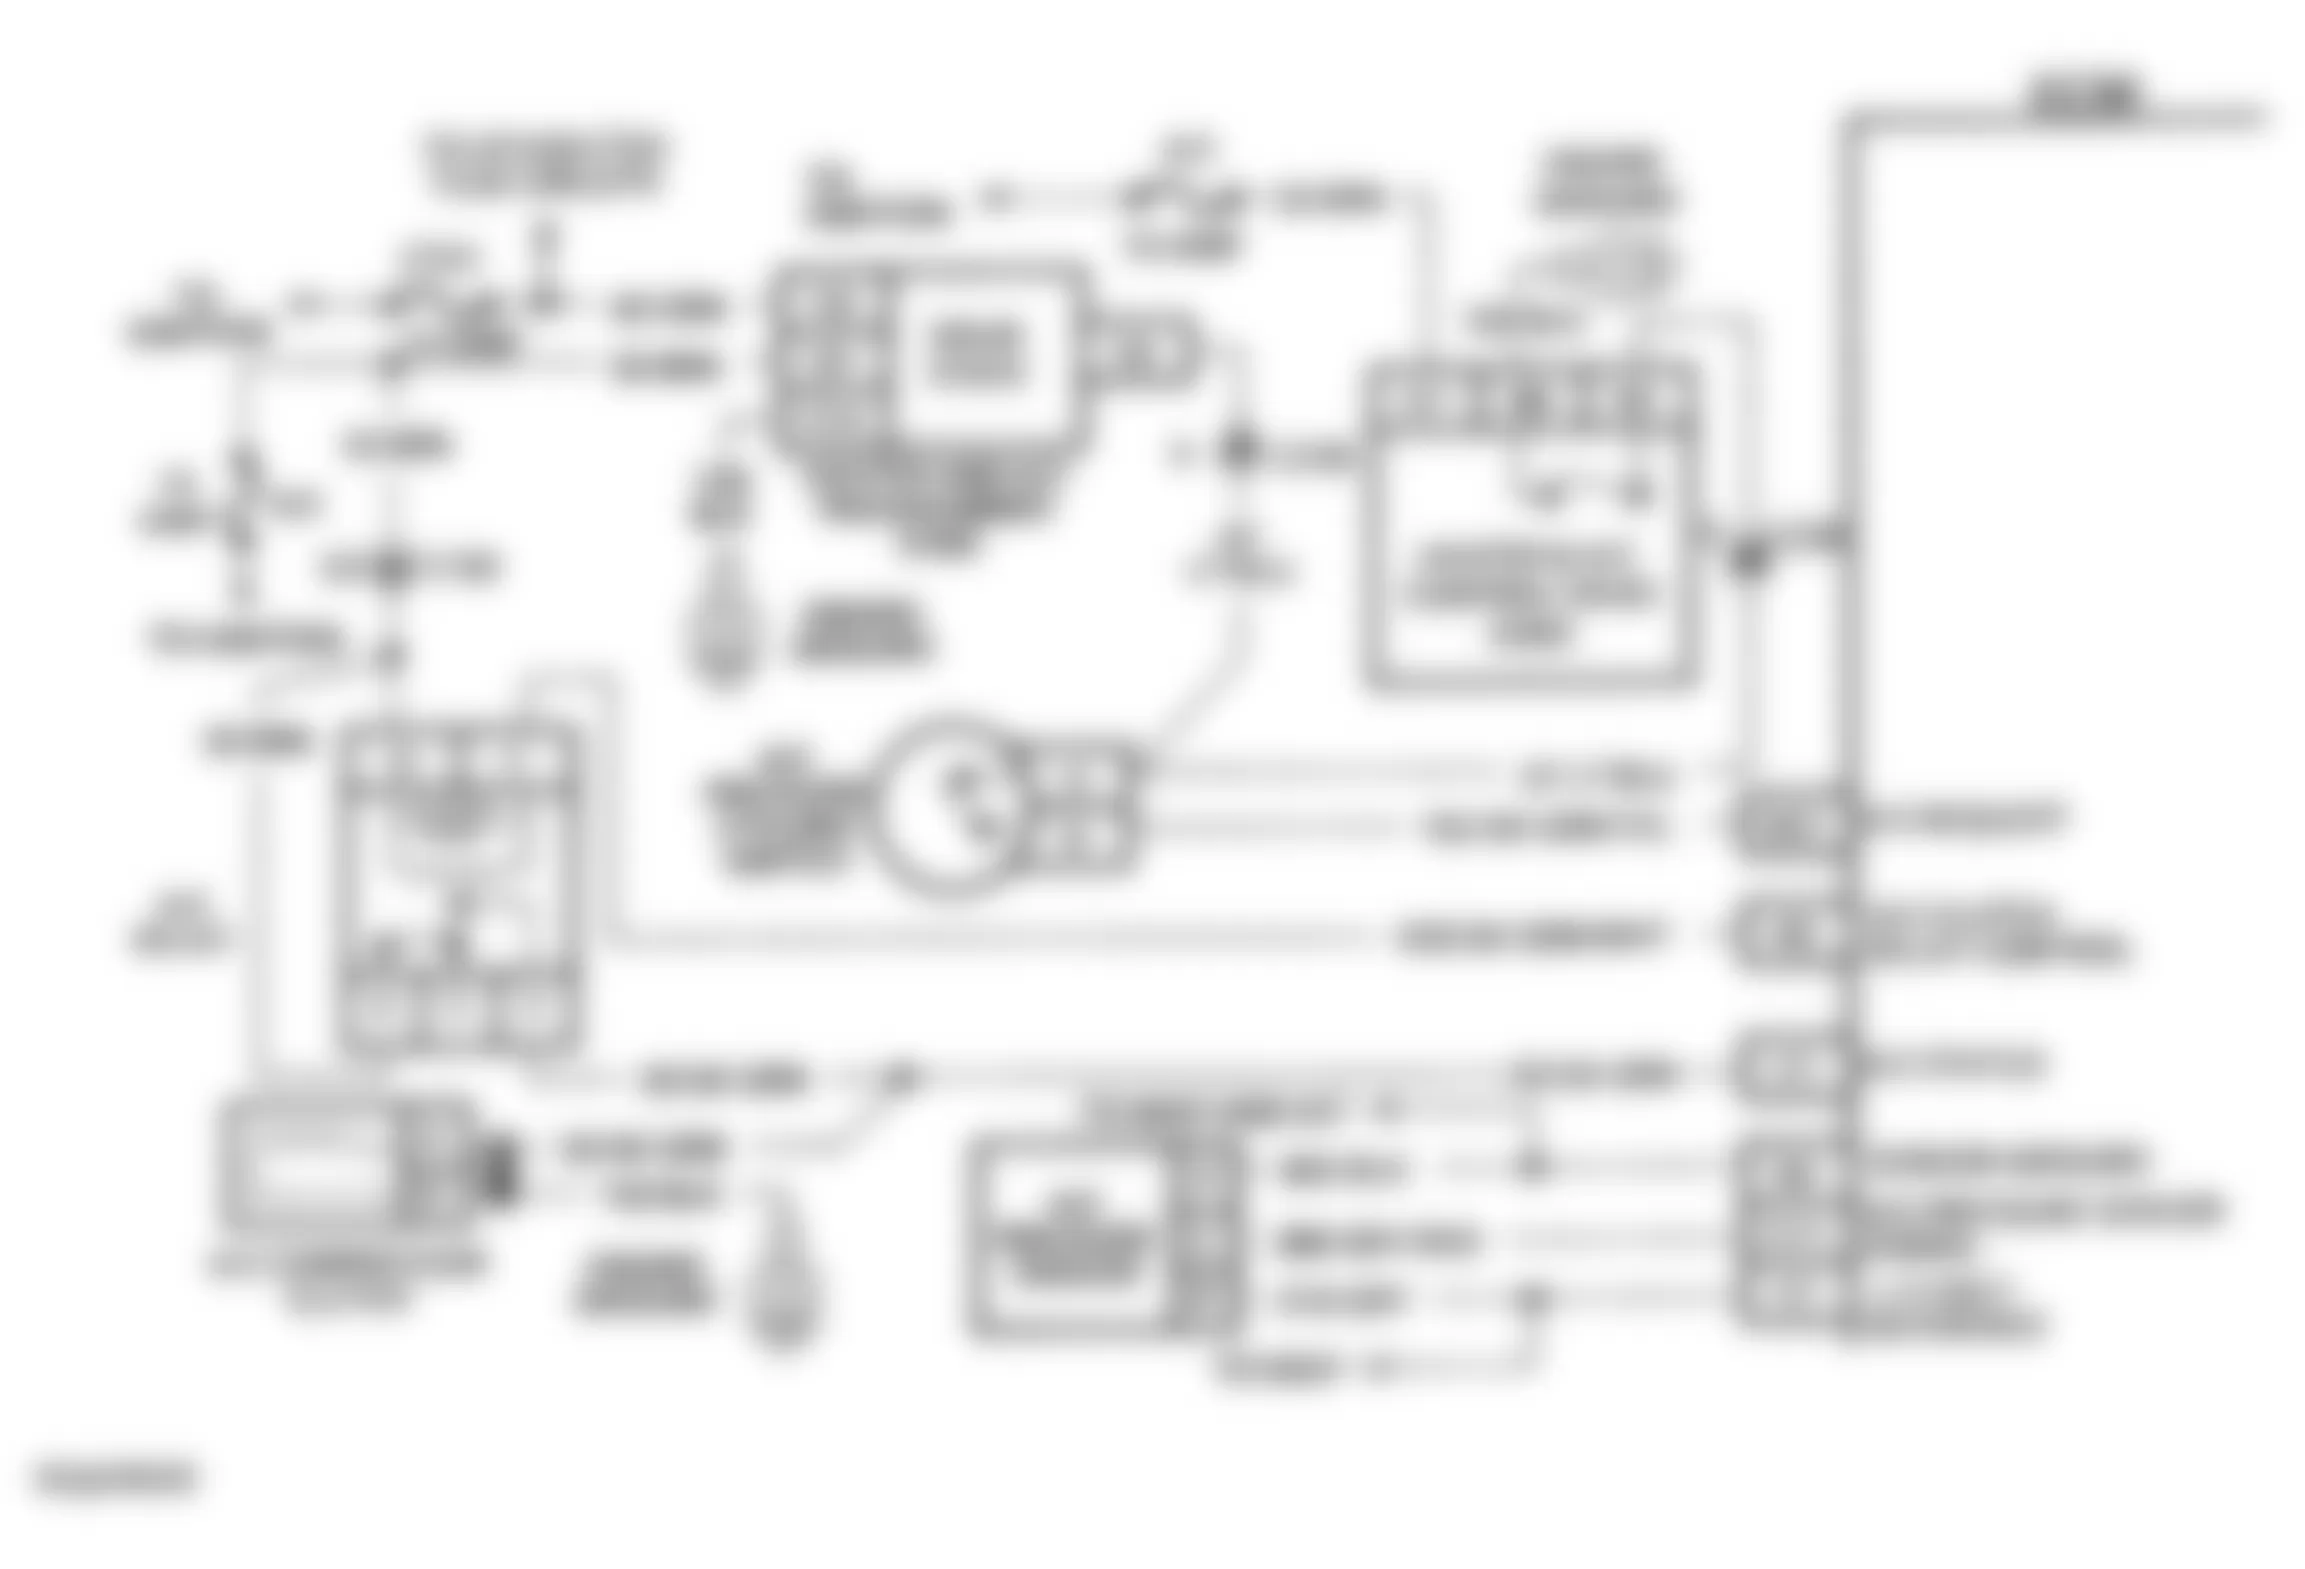 Chevrolet Corvette 1992 - Component Locations -  Code 68, Schematic, A/C Relay Ckt, Shorted To Voltage, Y Body